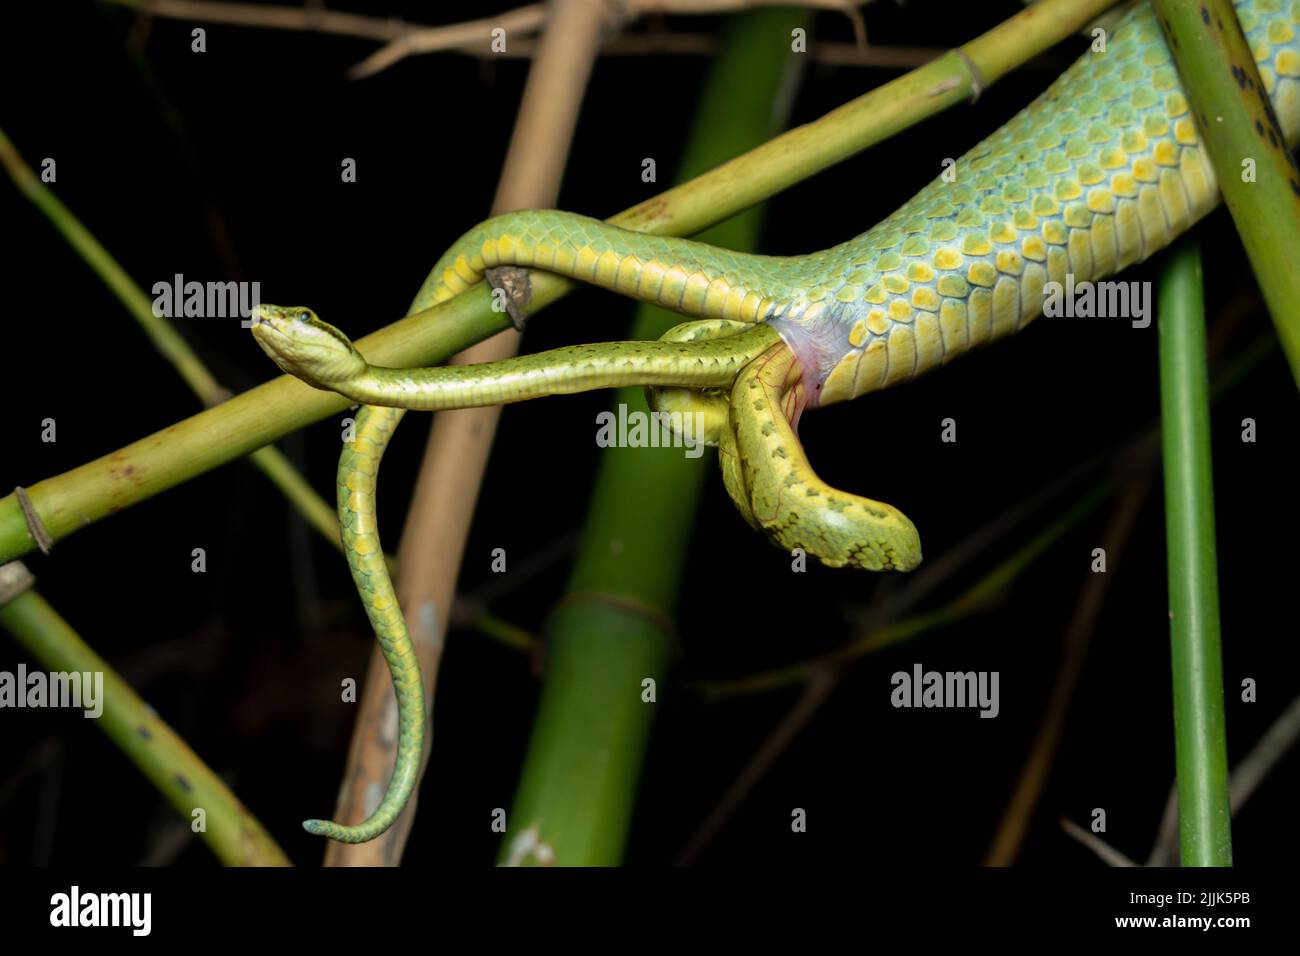 When born, the babies are 4.5 inches long. Valsad, India: THESE INCREDIBLE images capture a rare site of a snake giving birth, multiple tails extendin Stock Photo